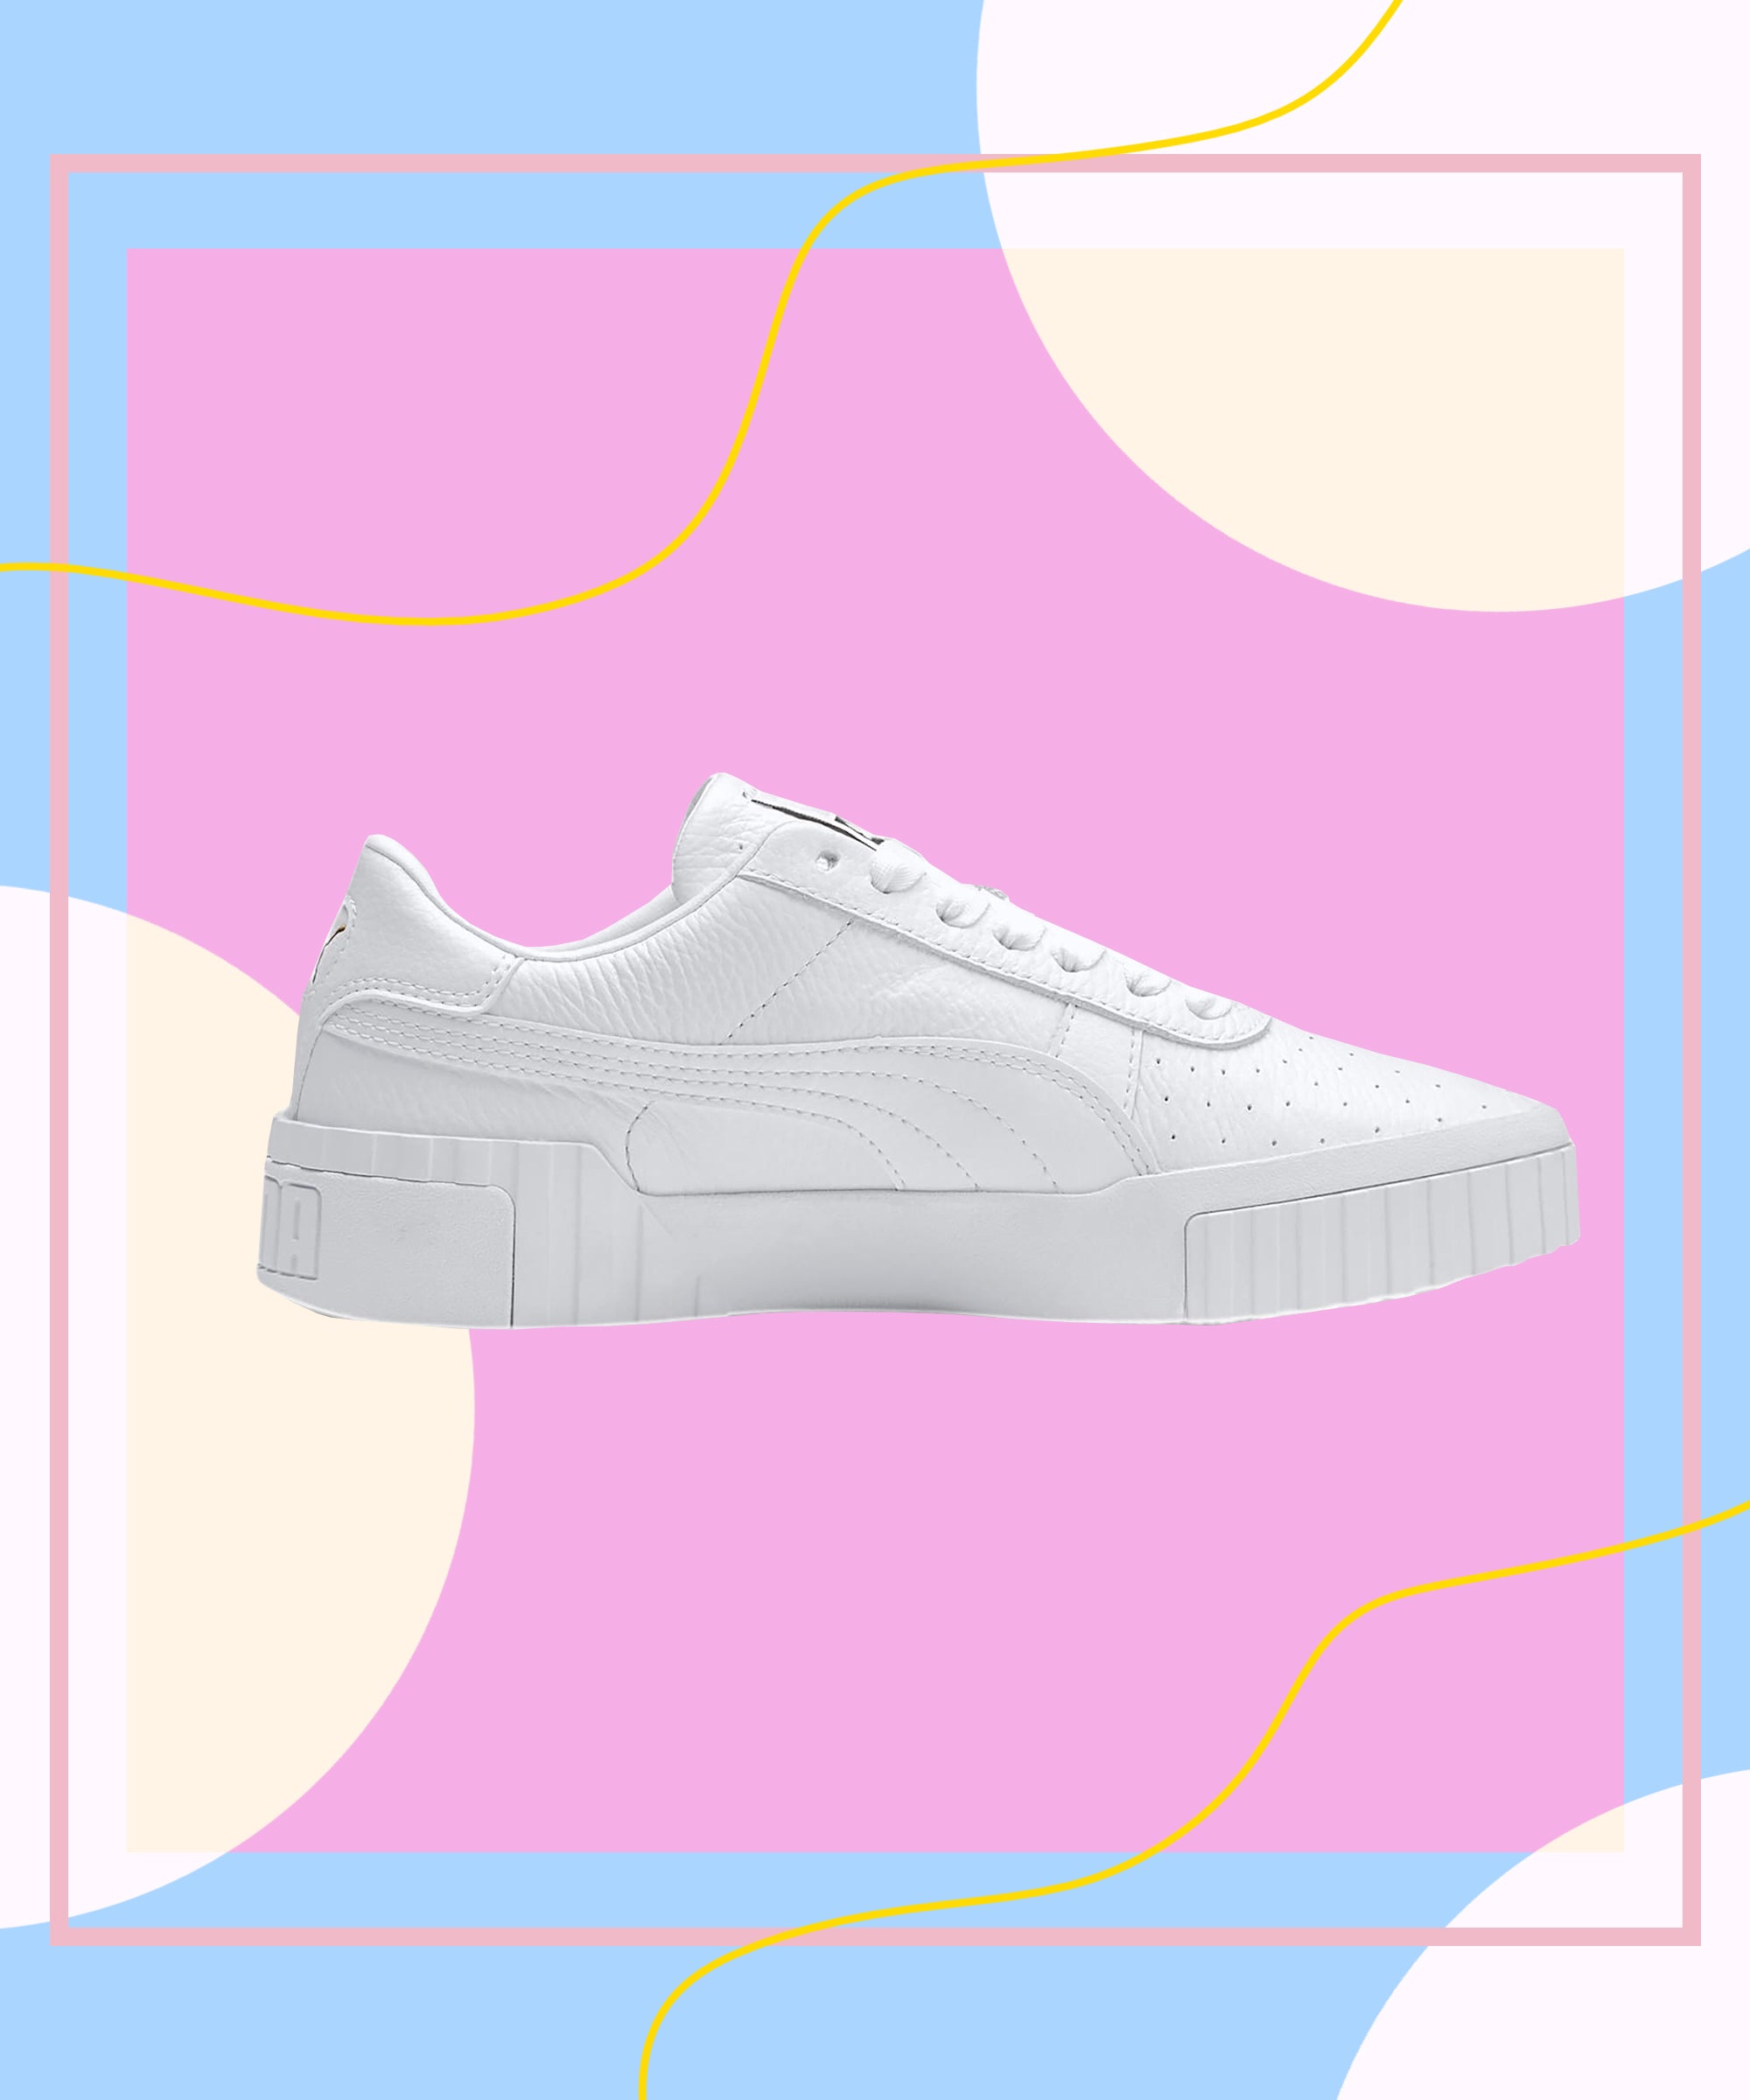 most stylish white sneakers